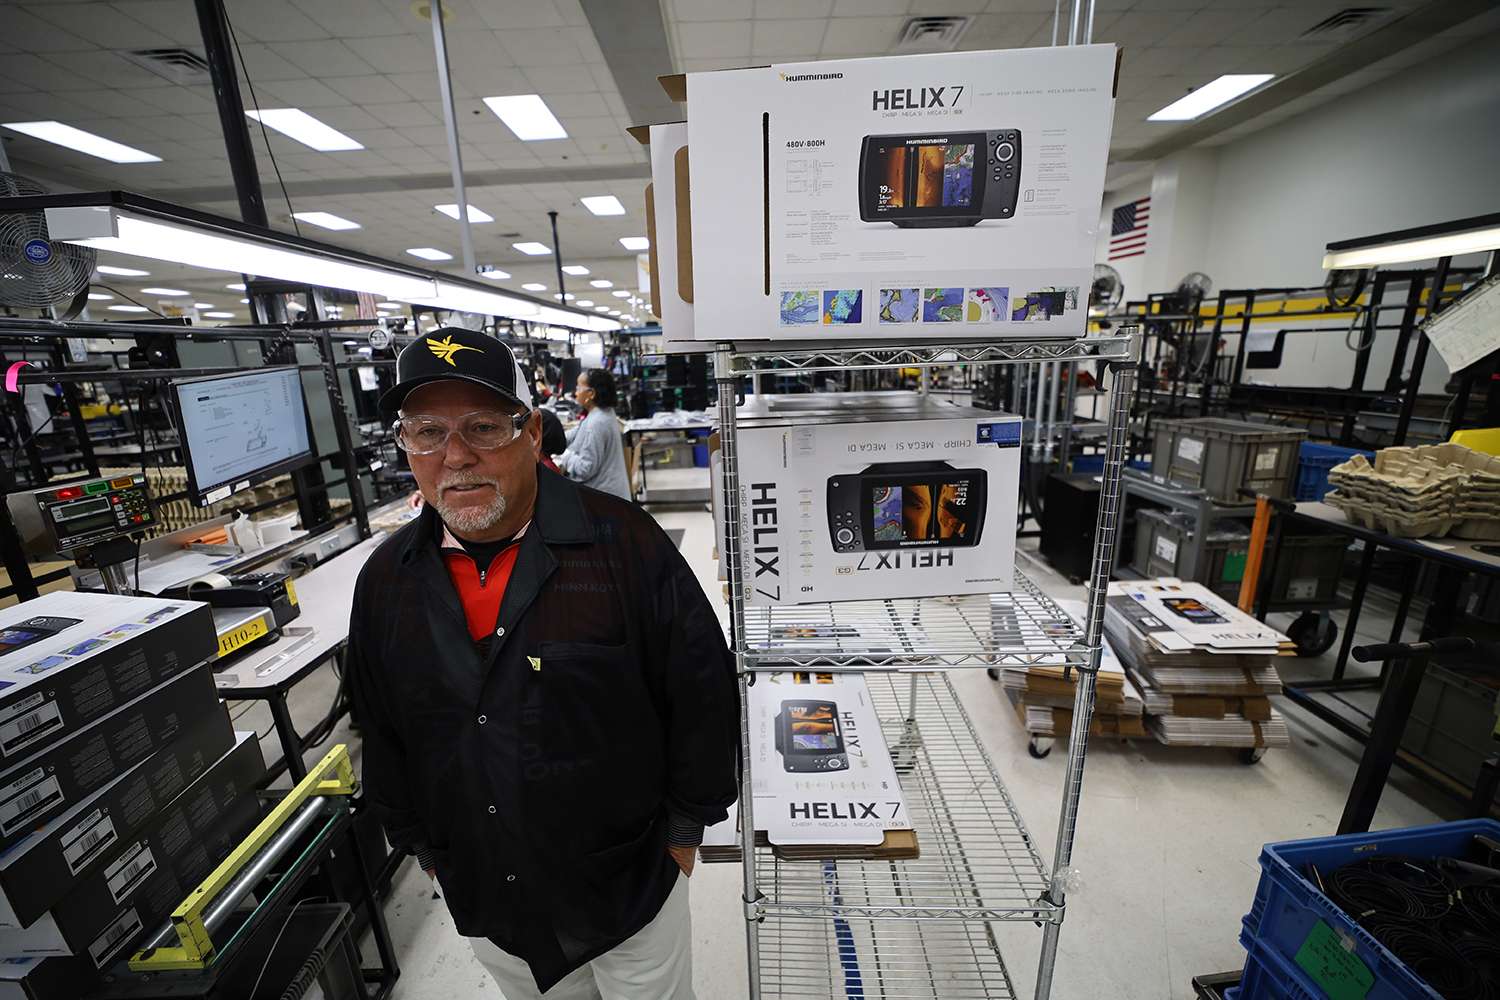 Herren stands by a stack of new Helix 7 units ready to ship out. 